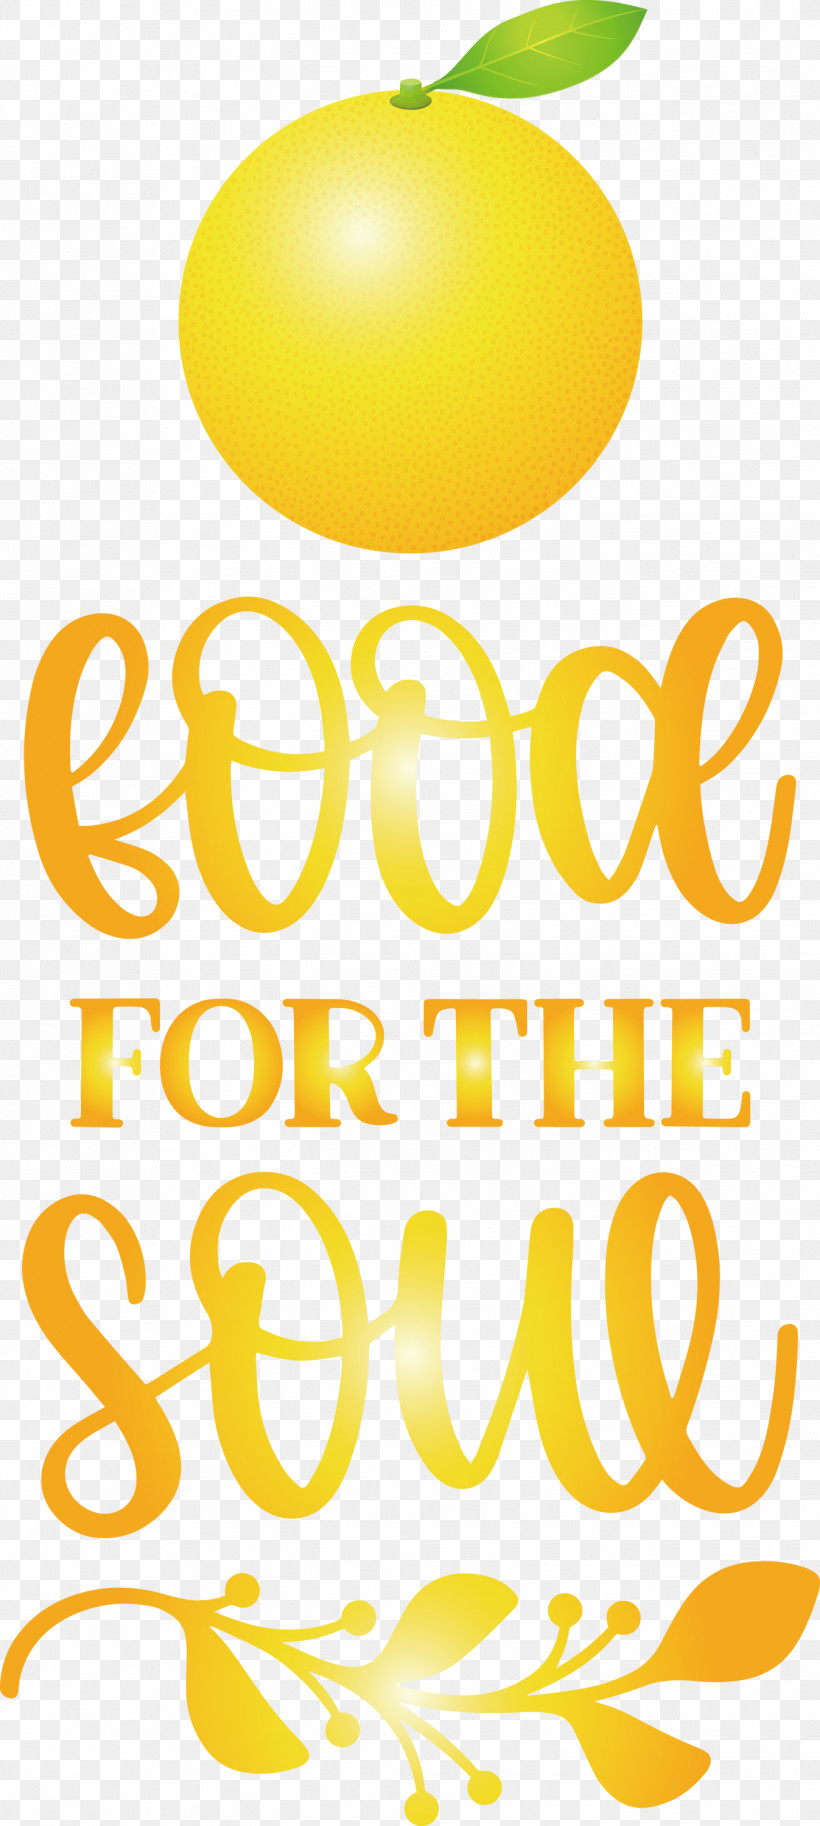 Food For The Soul Food Cooking, PNG, 1347x3000px, Food, Cooking, Logo, Poster, Social Media Download Free